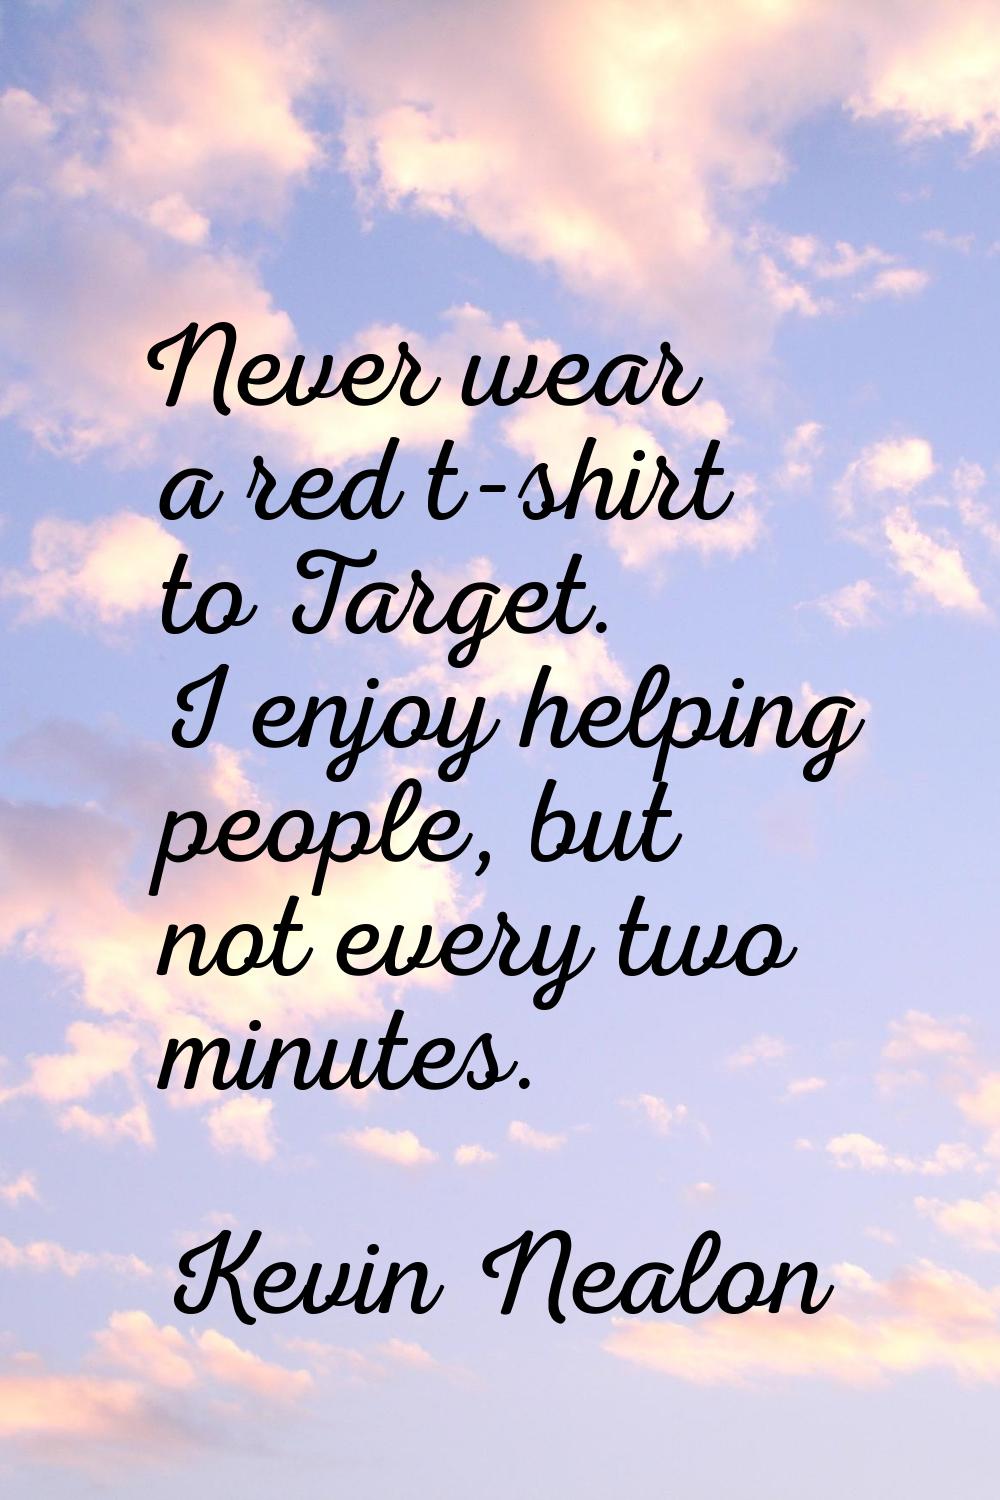 Never wear a red t-shirt to Target. I enjoy helping people, but not every two minutes.